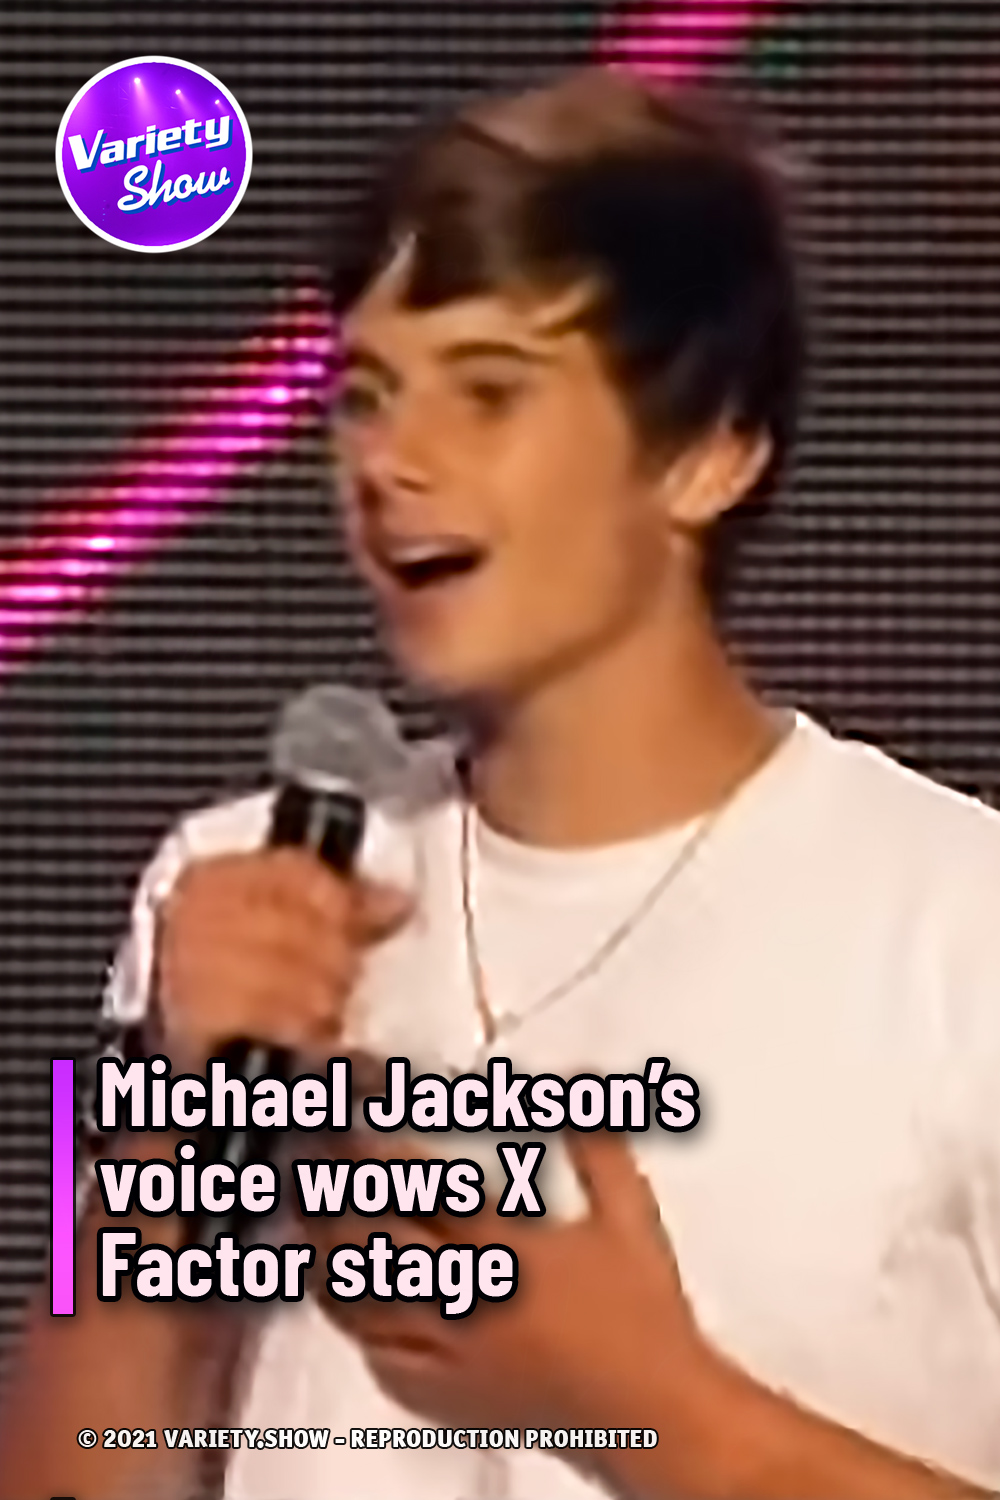 Michael Jackson’s voice wows X Factor stage